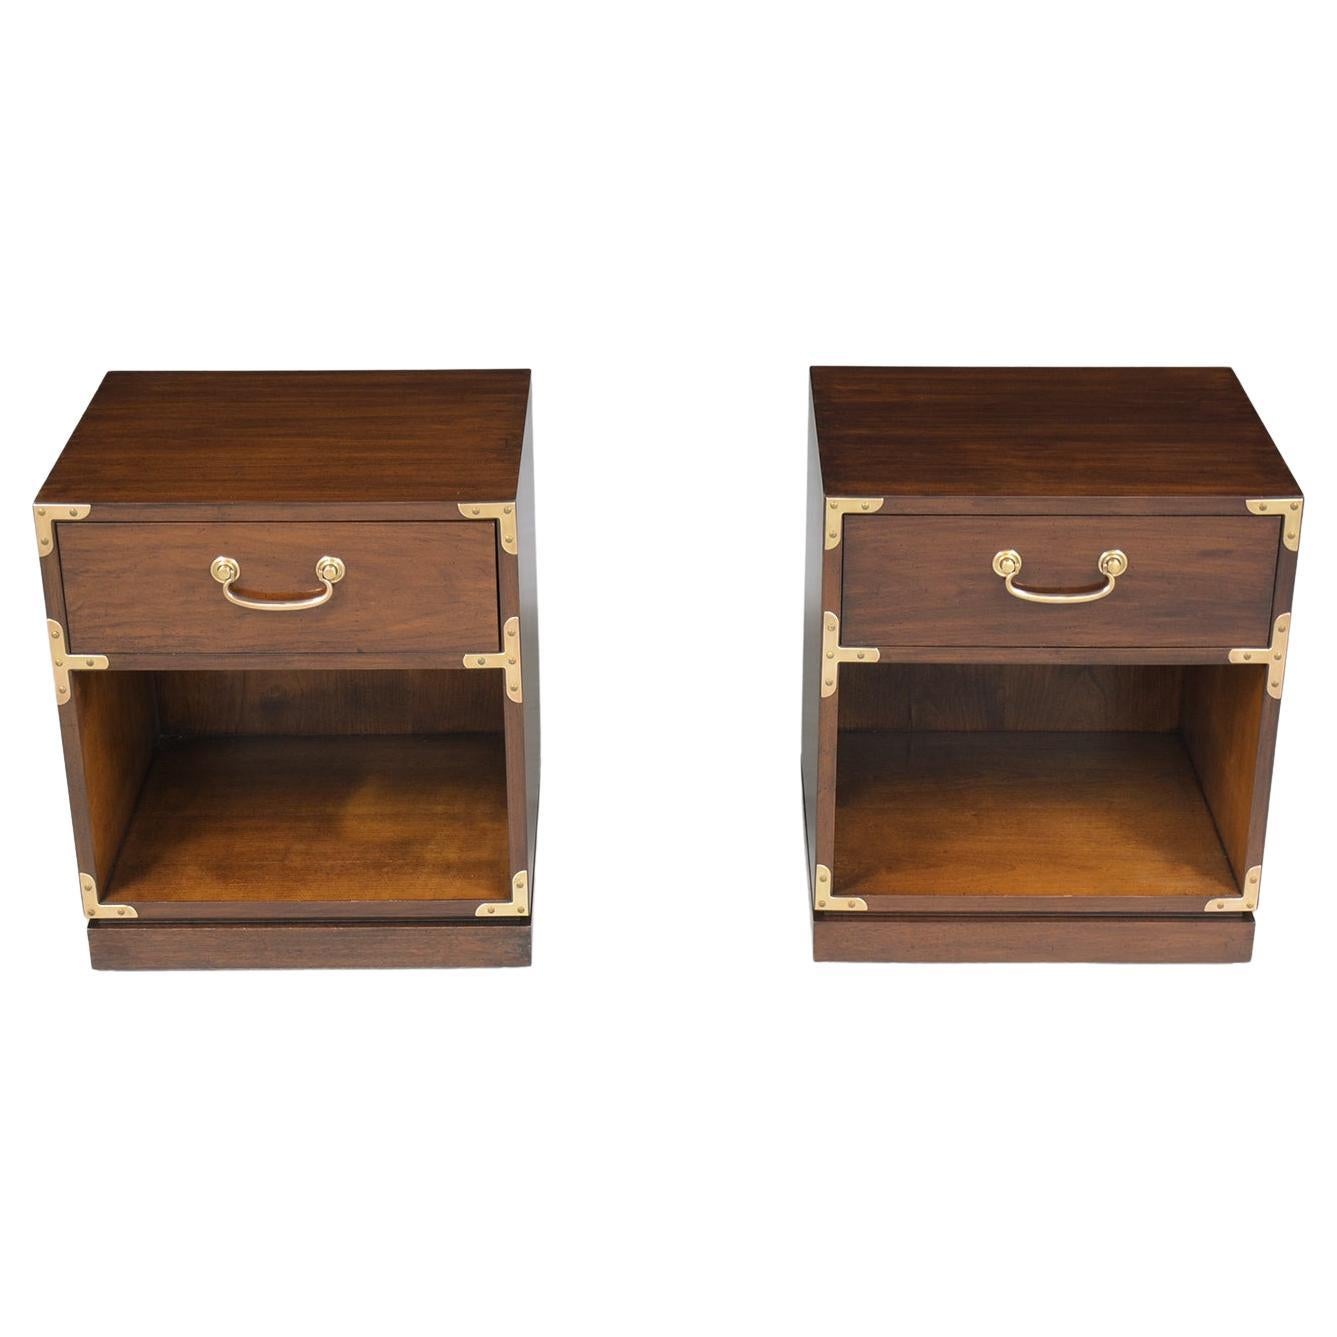 An extraordinary pair of mid-century nightstands by Drexel is hand-crafted out of walnut wood and are in great condition and is completely restored and refinished by our professional craftsmen team. These 1960s bedside tables are eye-catching and